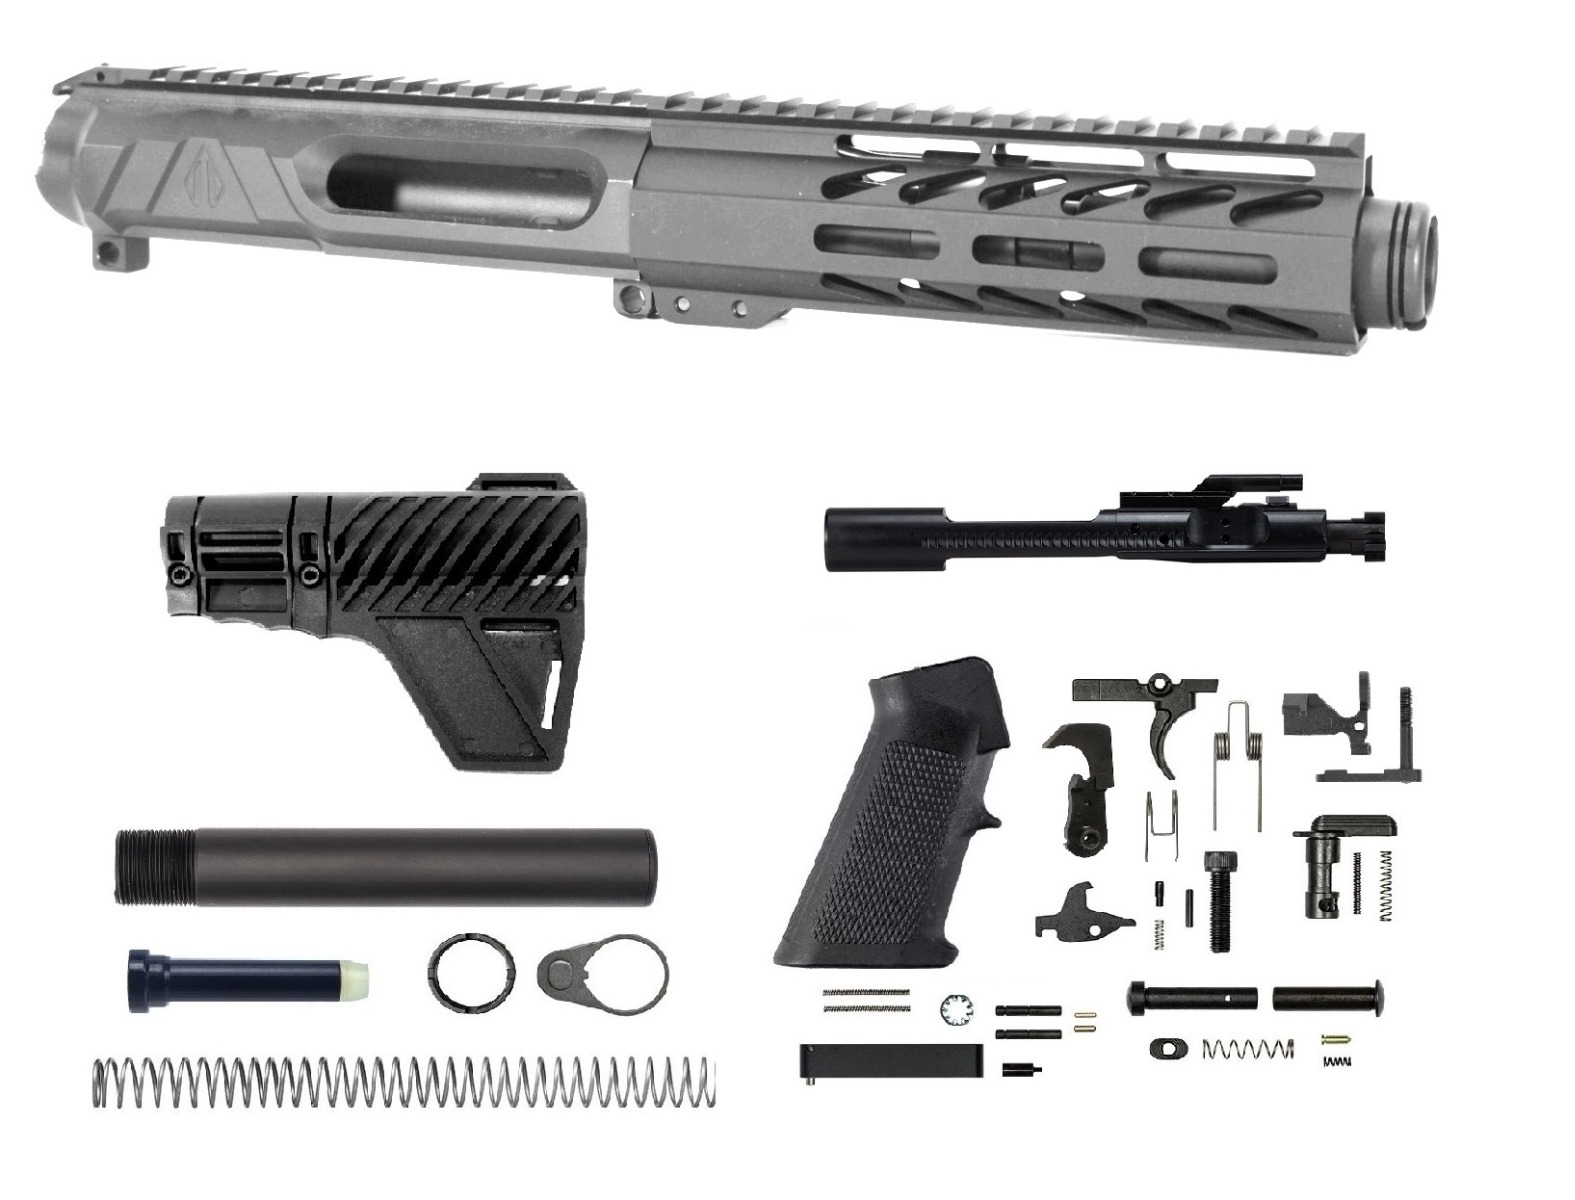 5 inch AR-15 NR Side Charging 5.56 NATO M-LOK Melonite Upper with Flash Can Kit | Pro2A Tactical